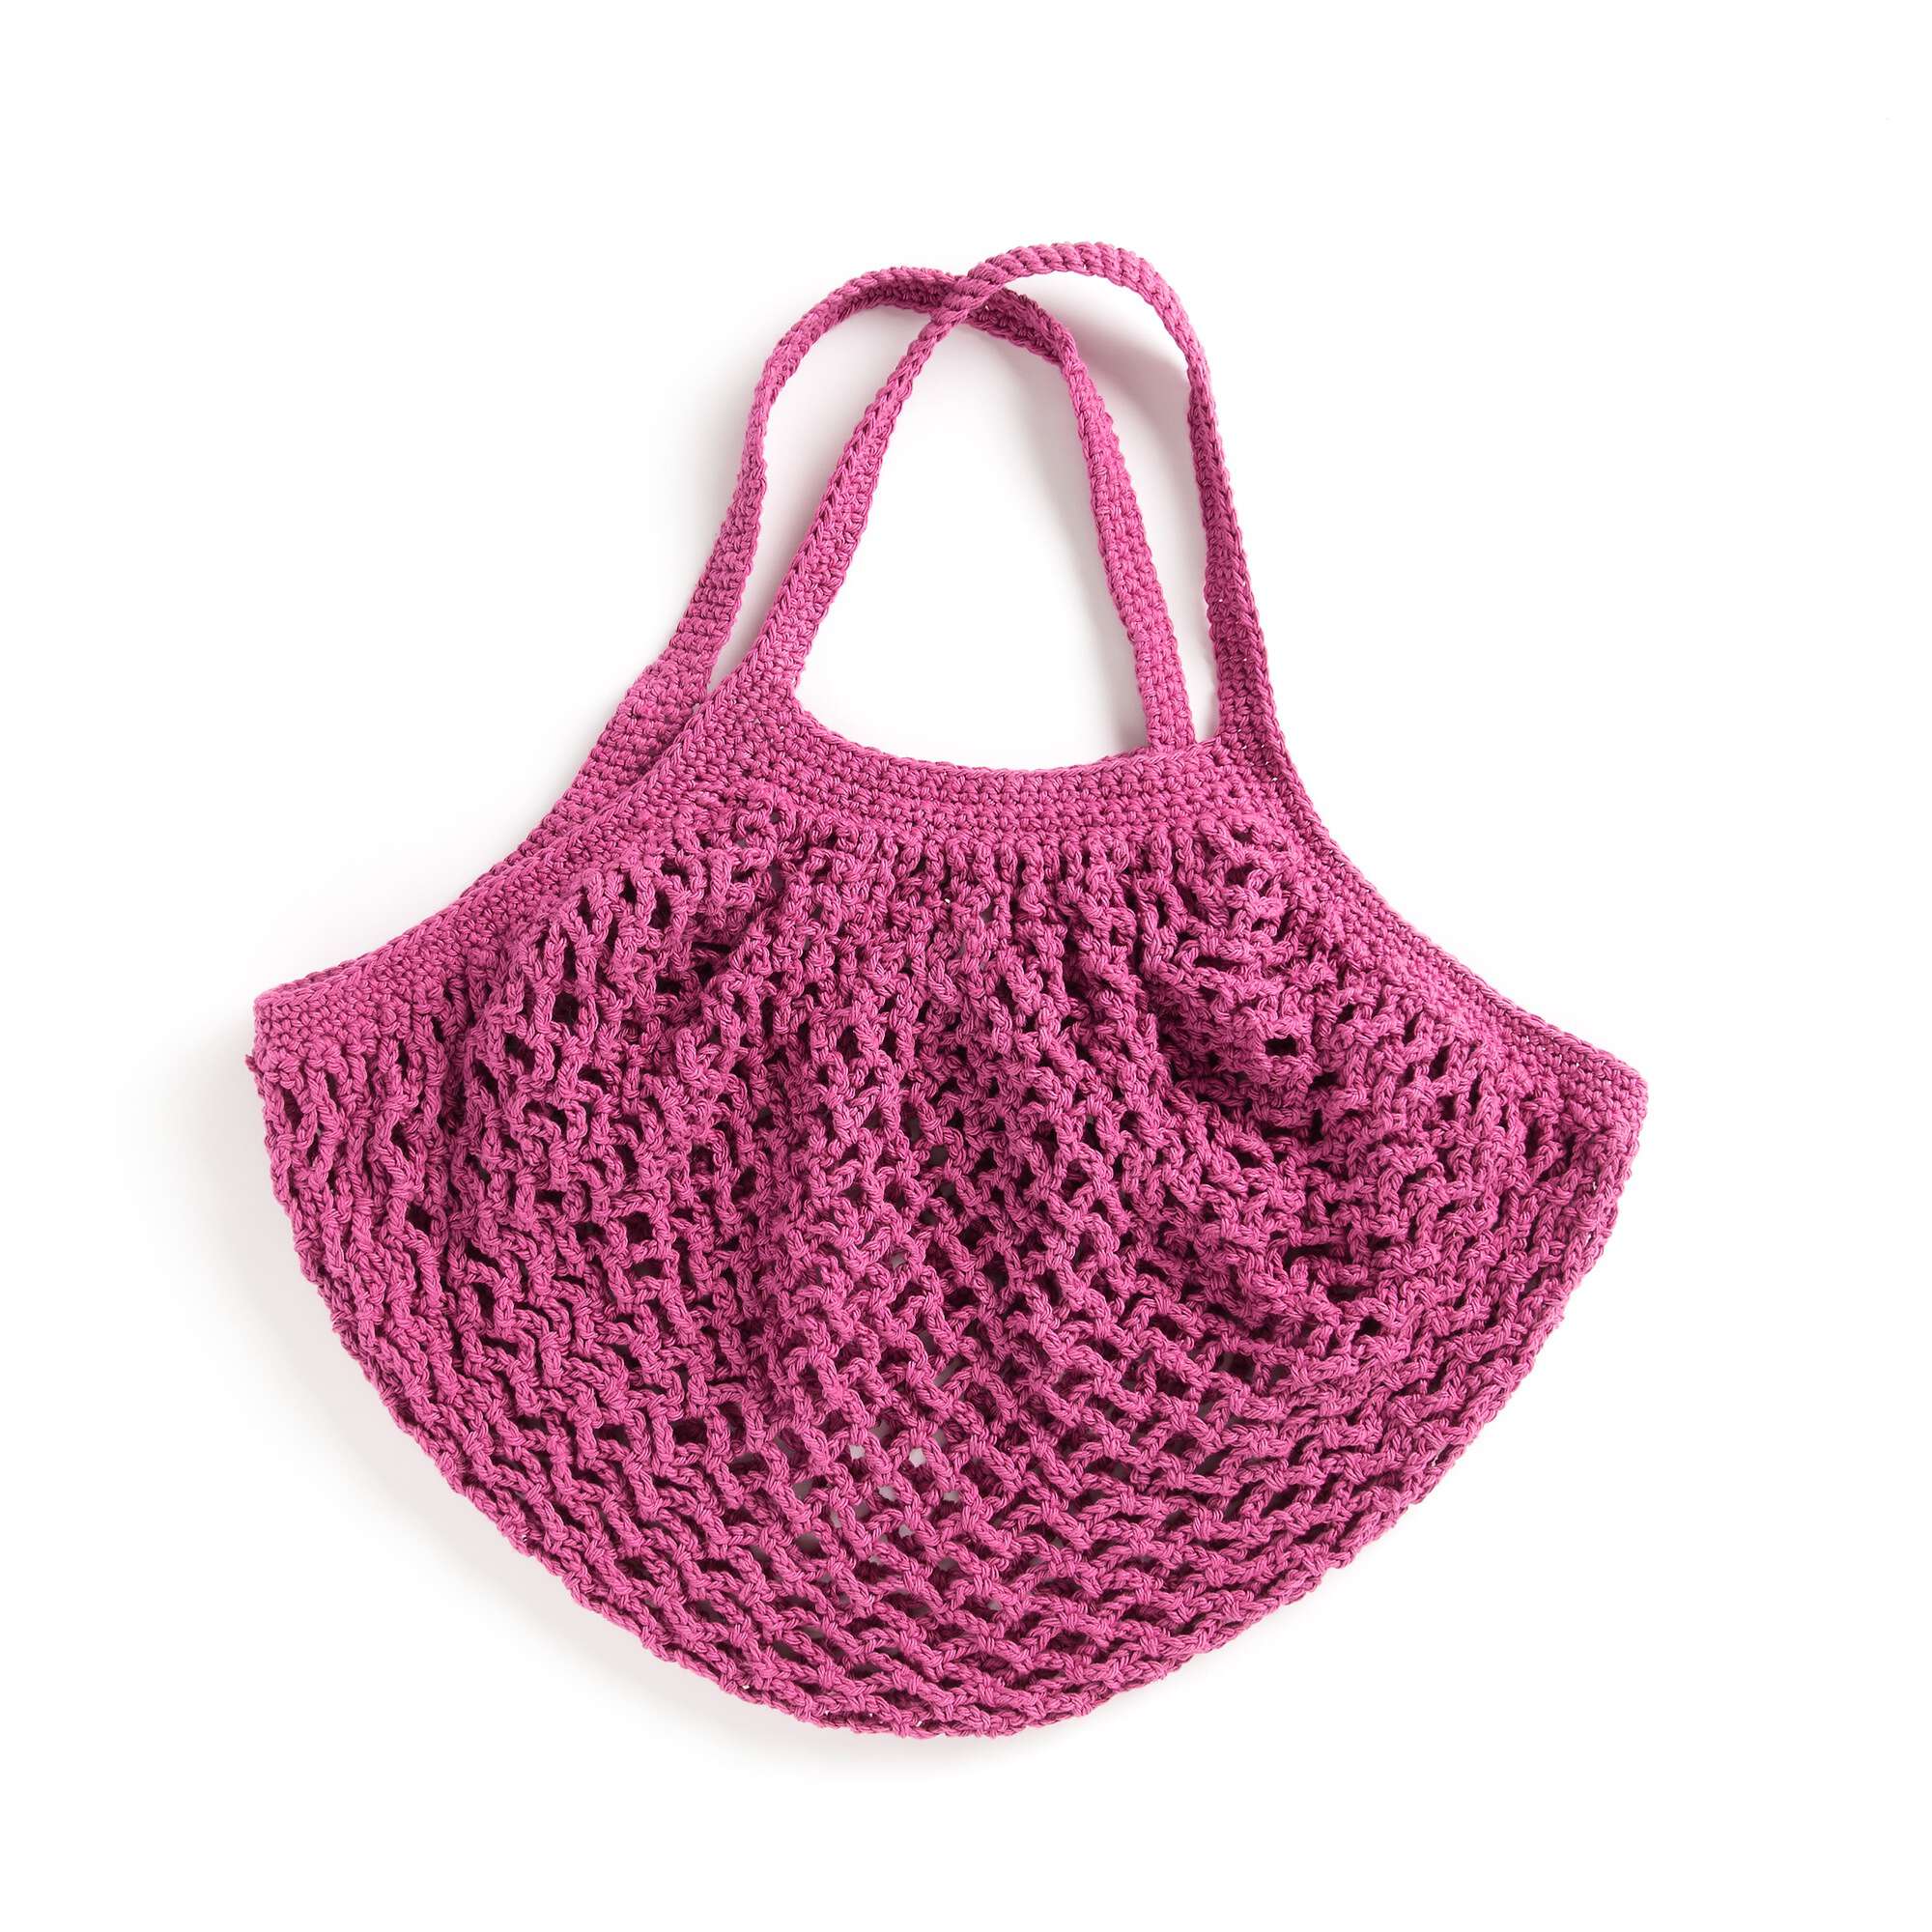 Ravelry: Shopping Tote Bag pattern by Lily Sugar'n Cream and